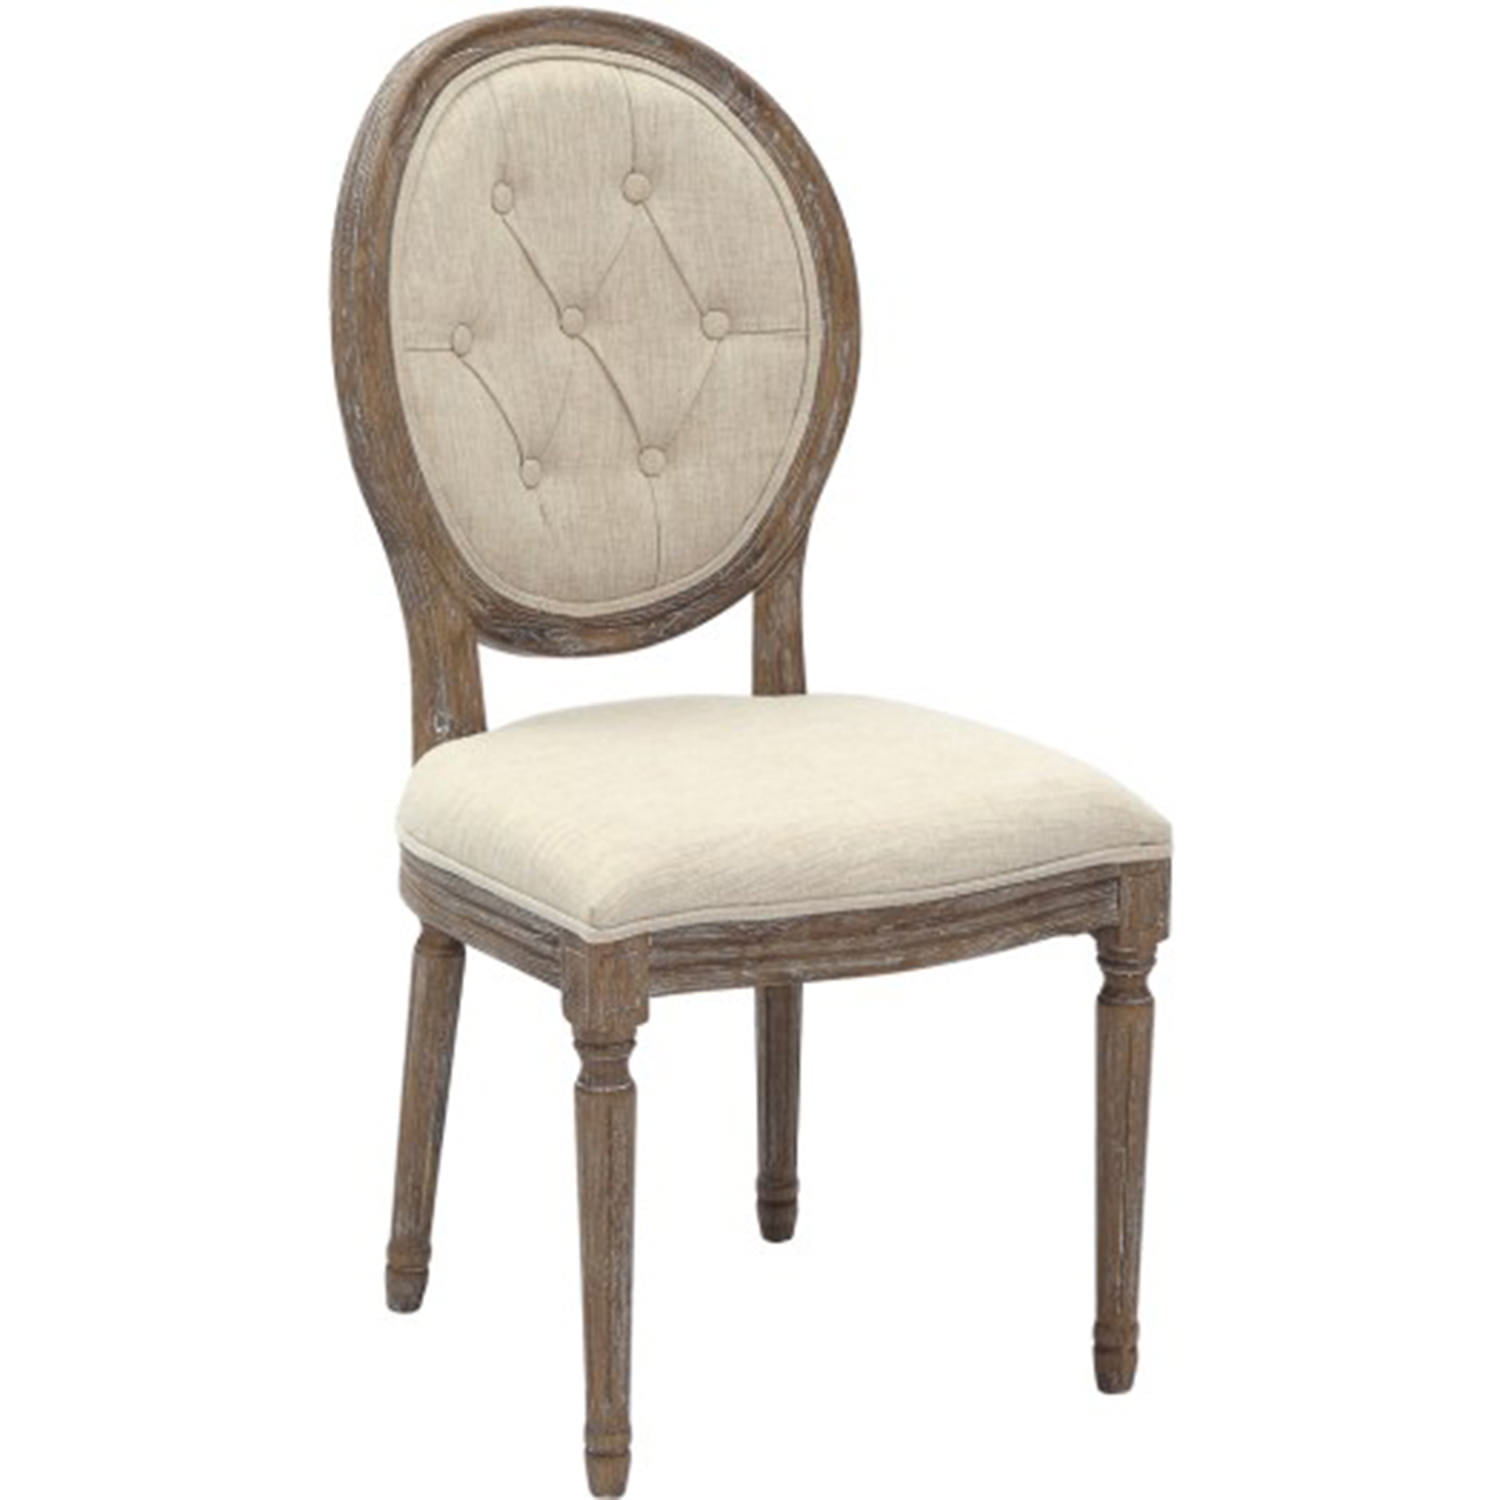 2xhome Cream Color Upholstered Button Tufted Back Fabric Ghost Chair